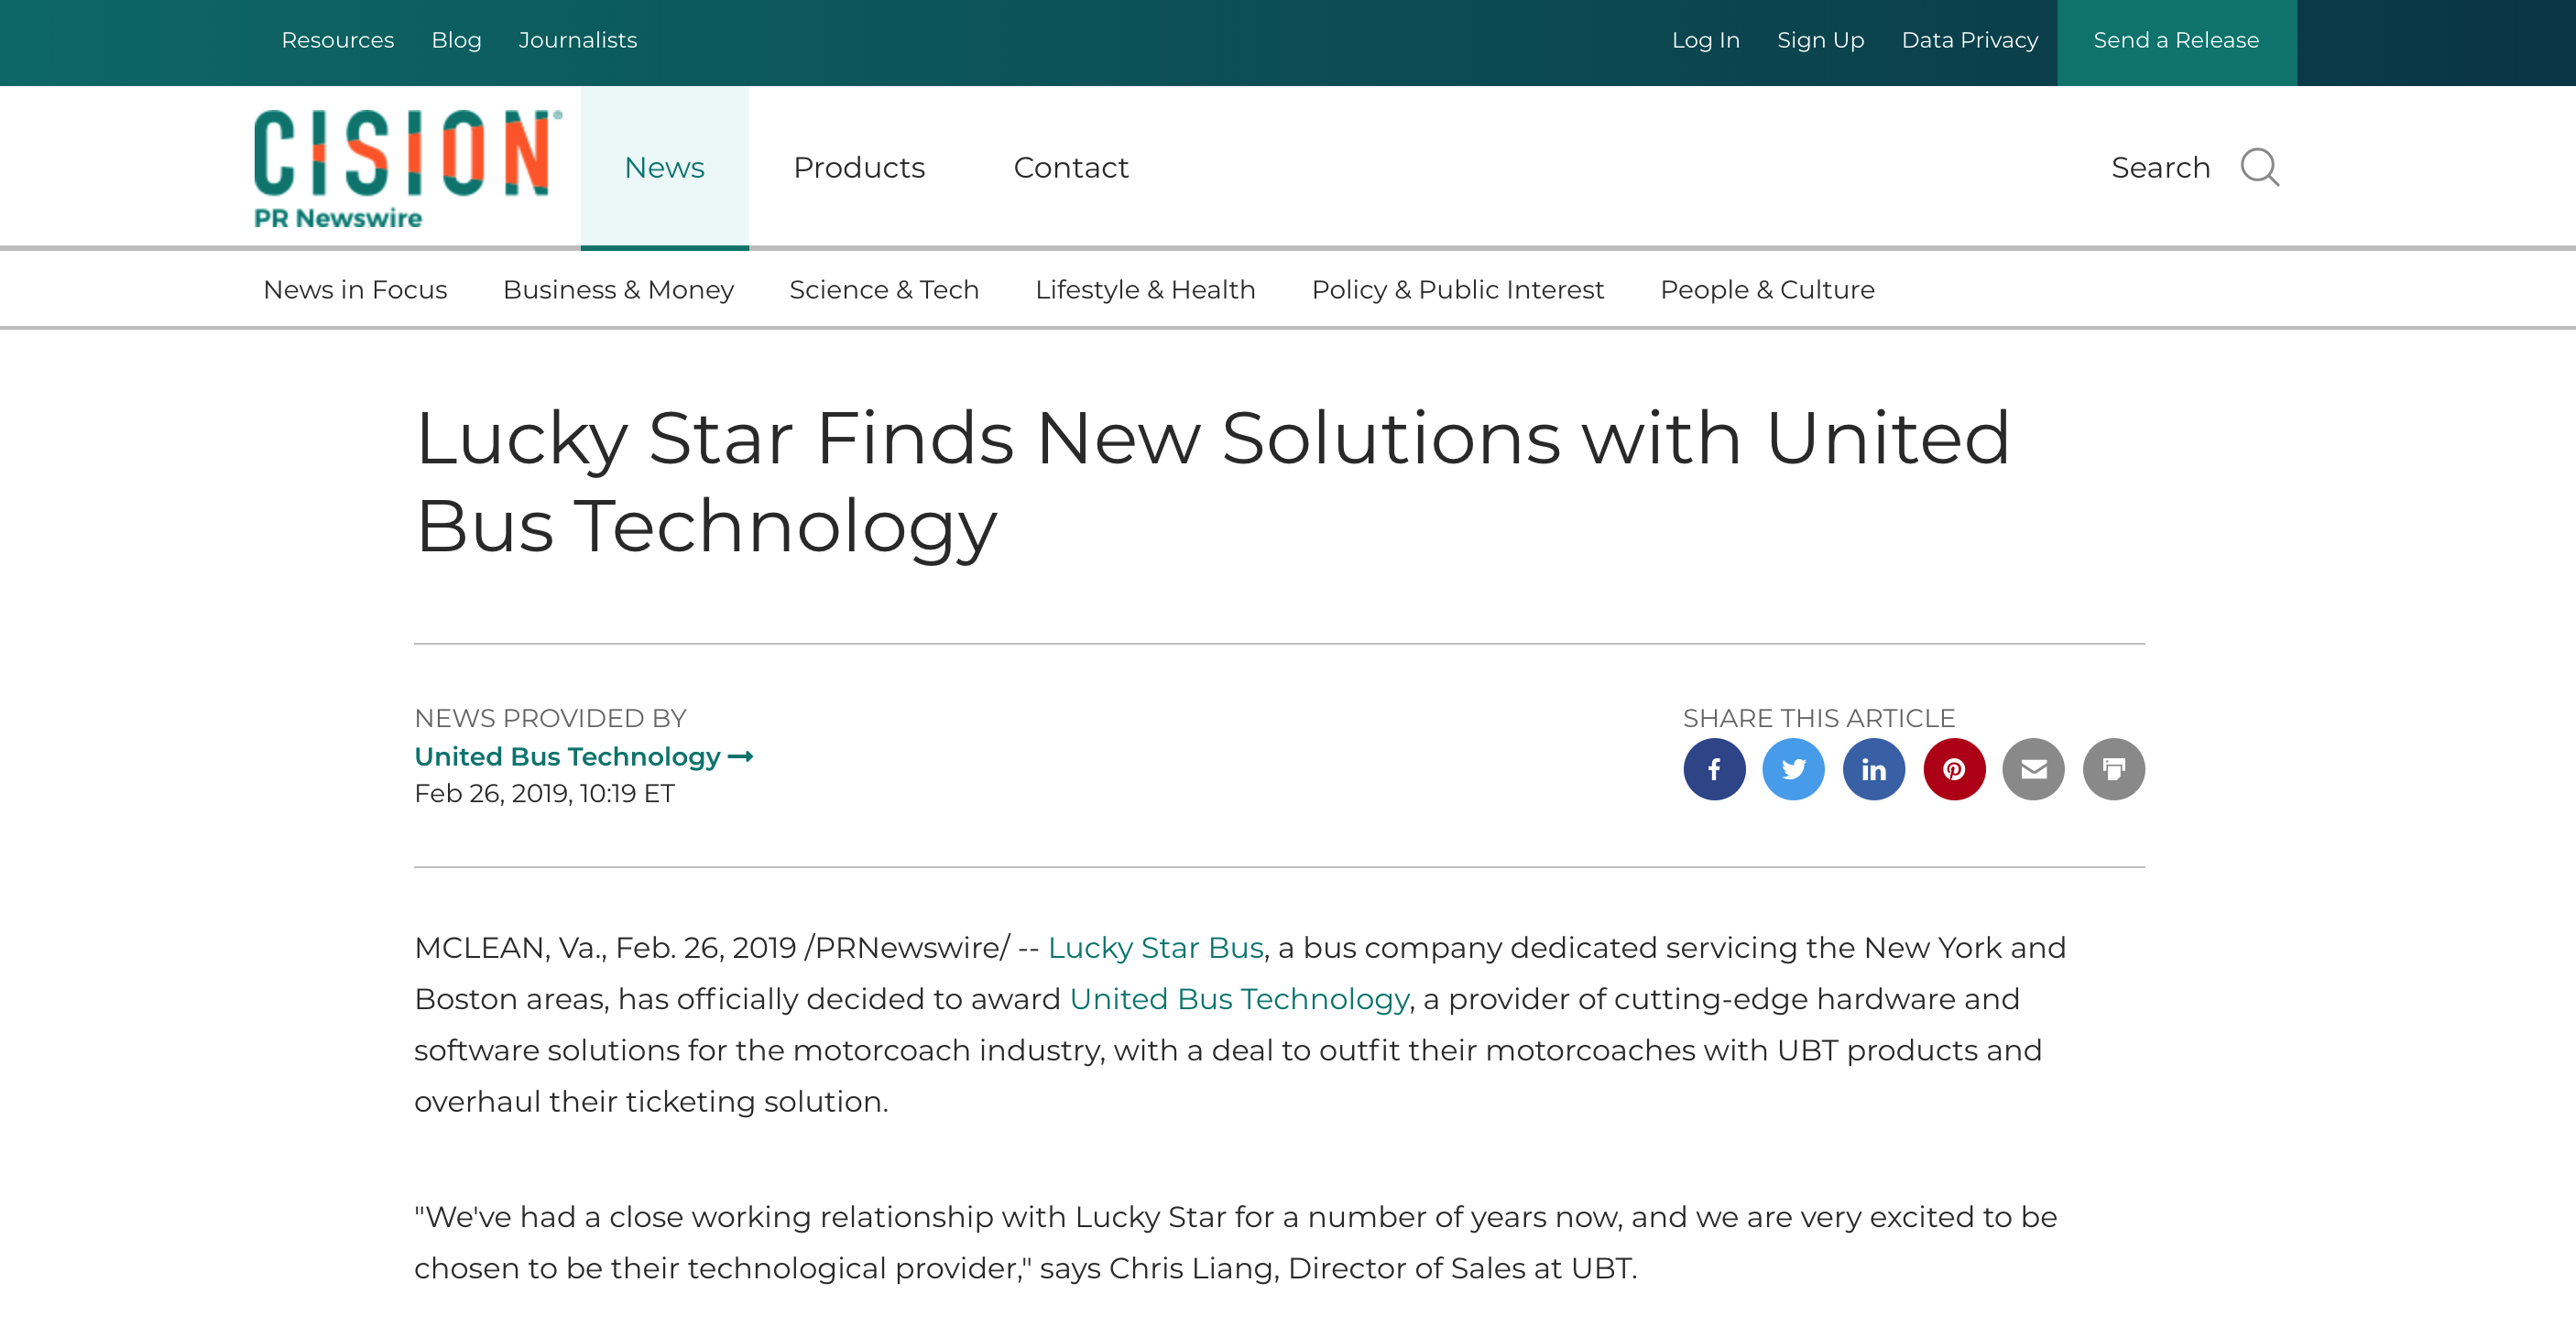 Lucky Star Finds New Solutions with United Bus Technology